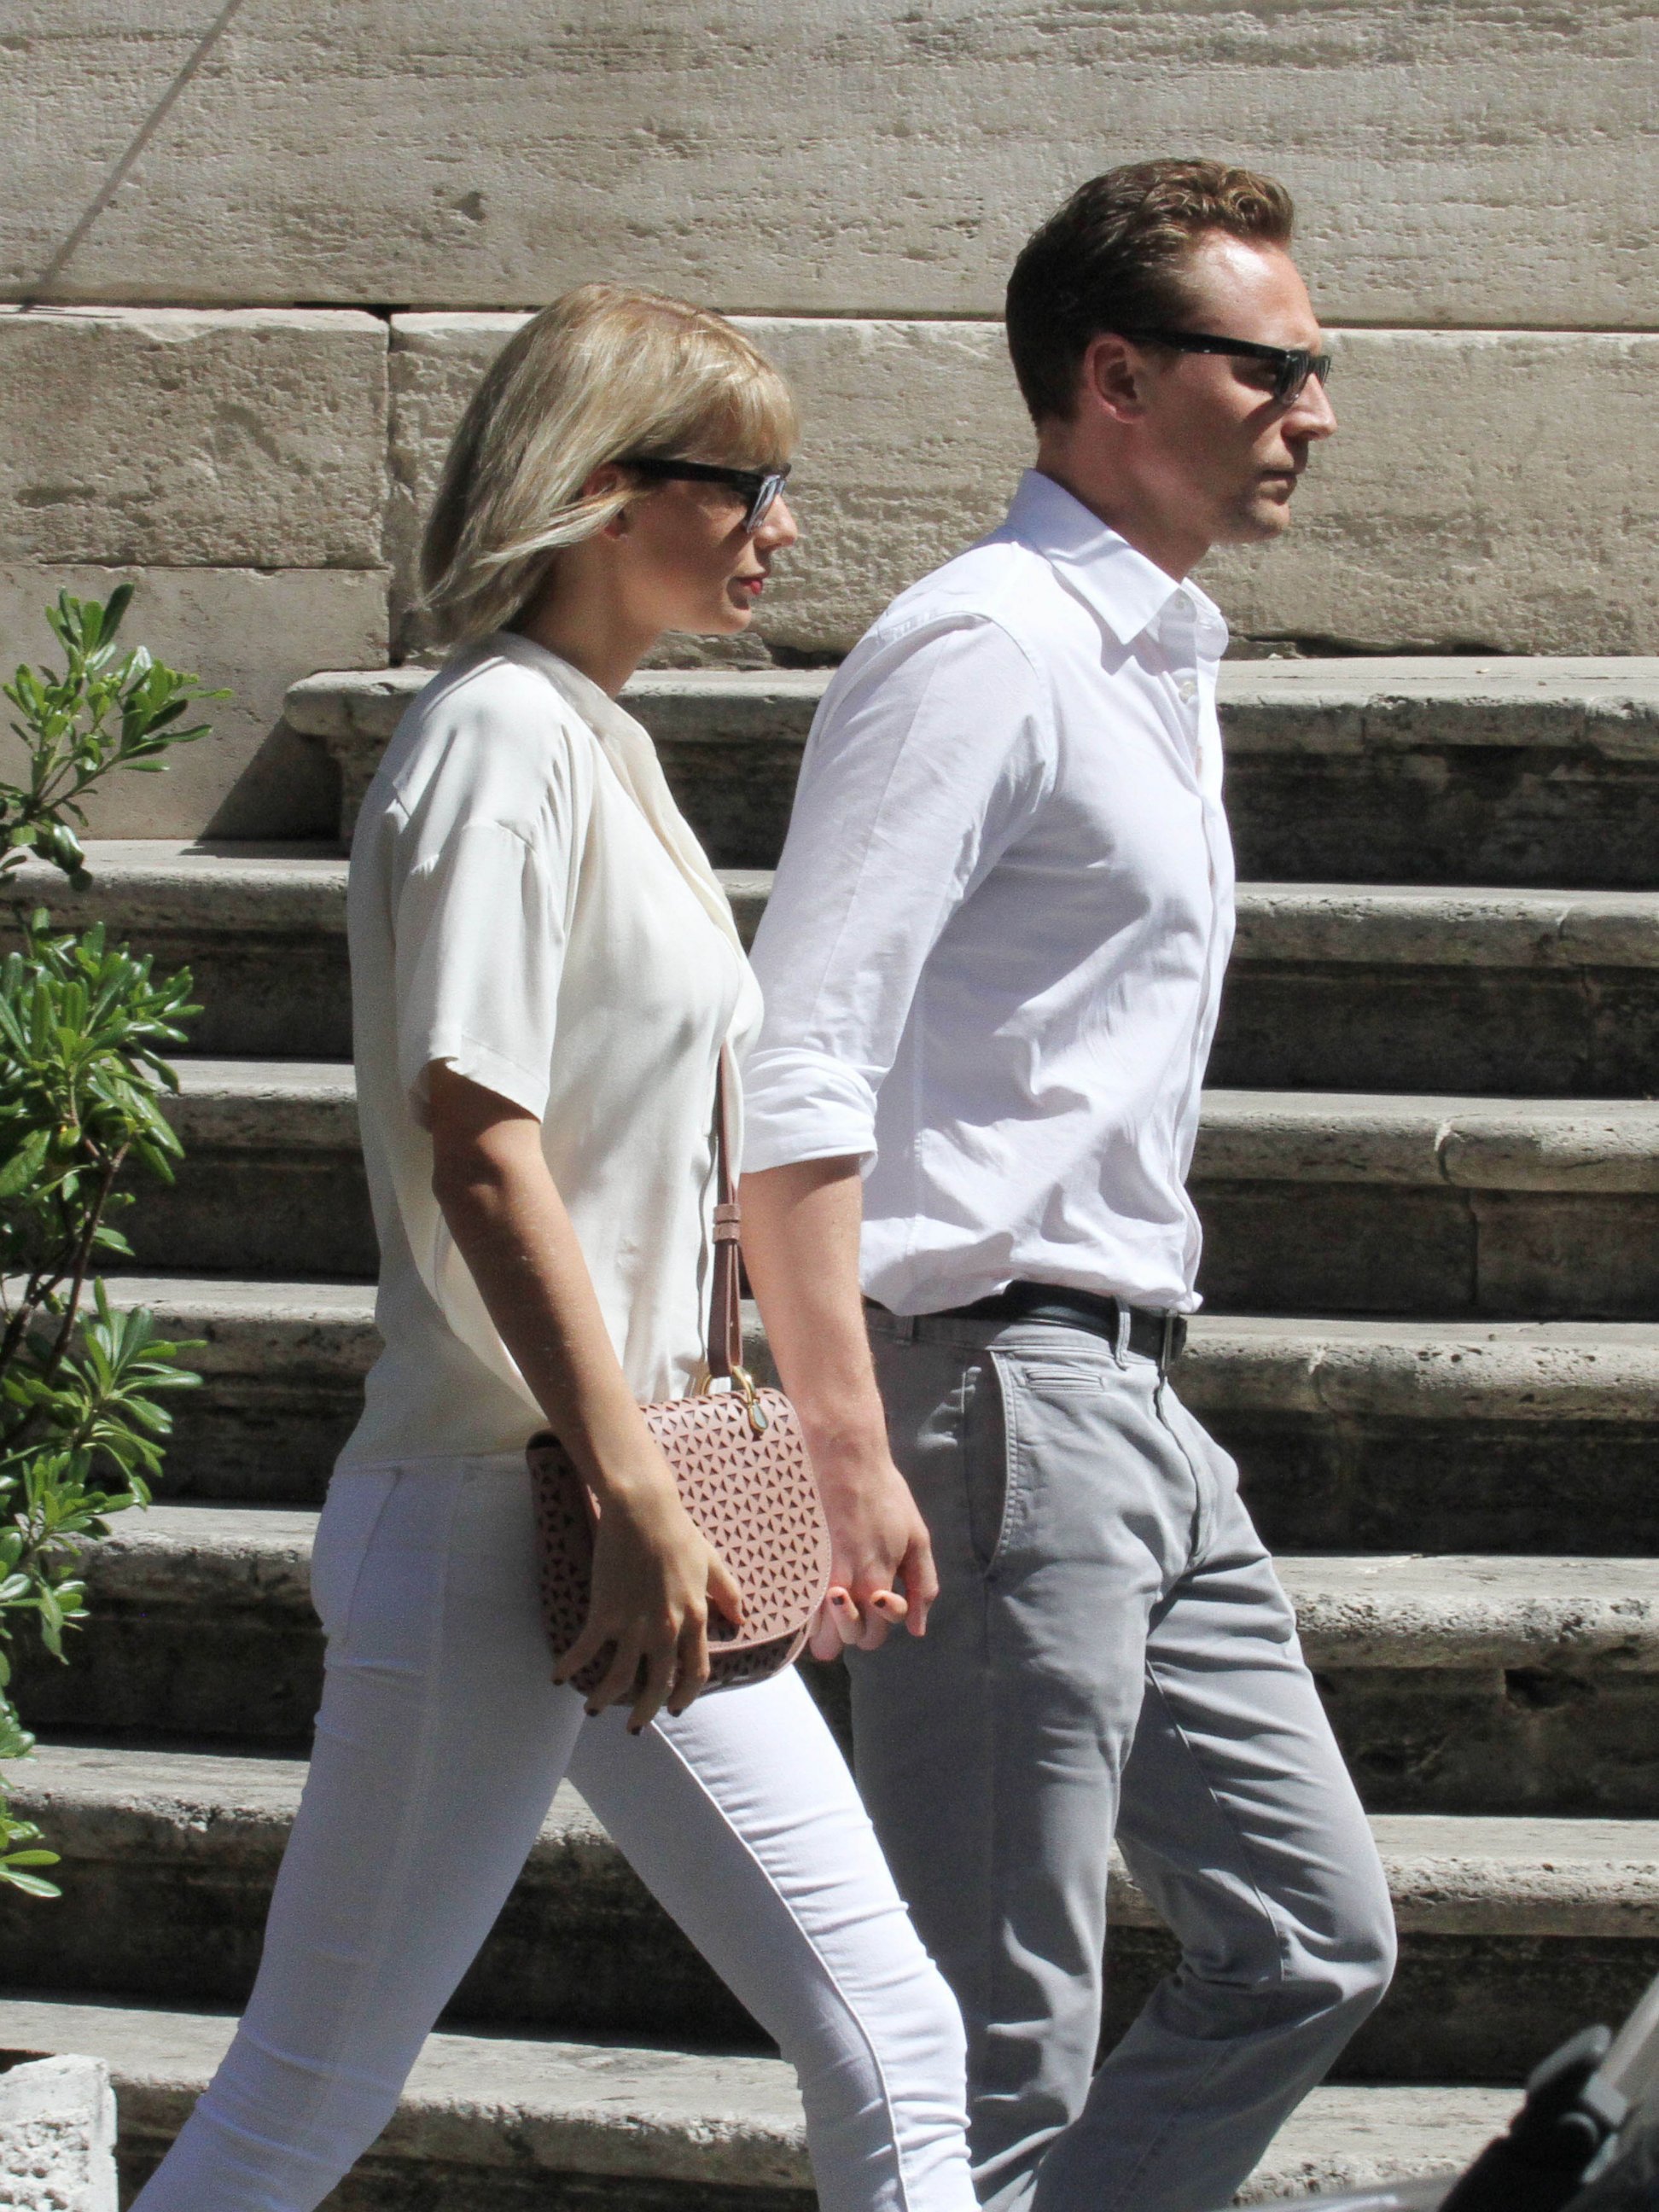 PHOTO: Taylor Swift and Tom Hiddleston are seen in Rome on June 28, 2016.